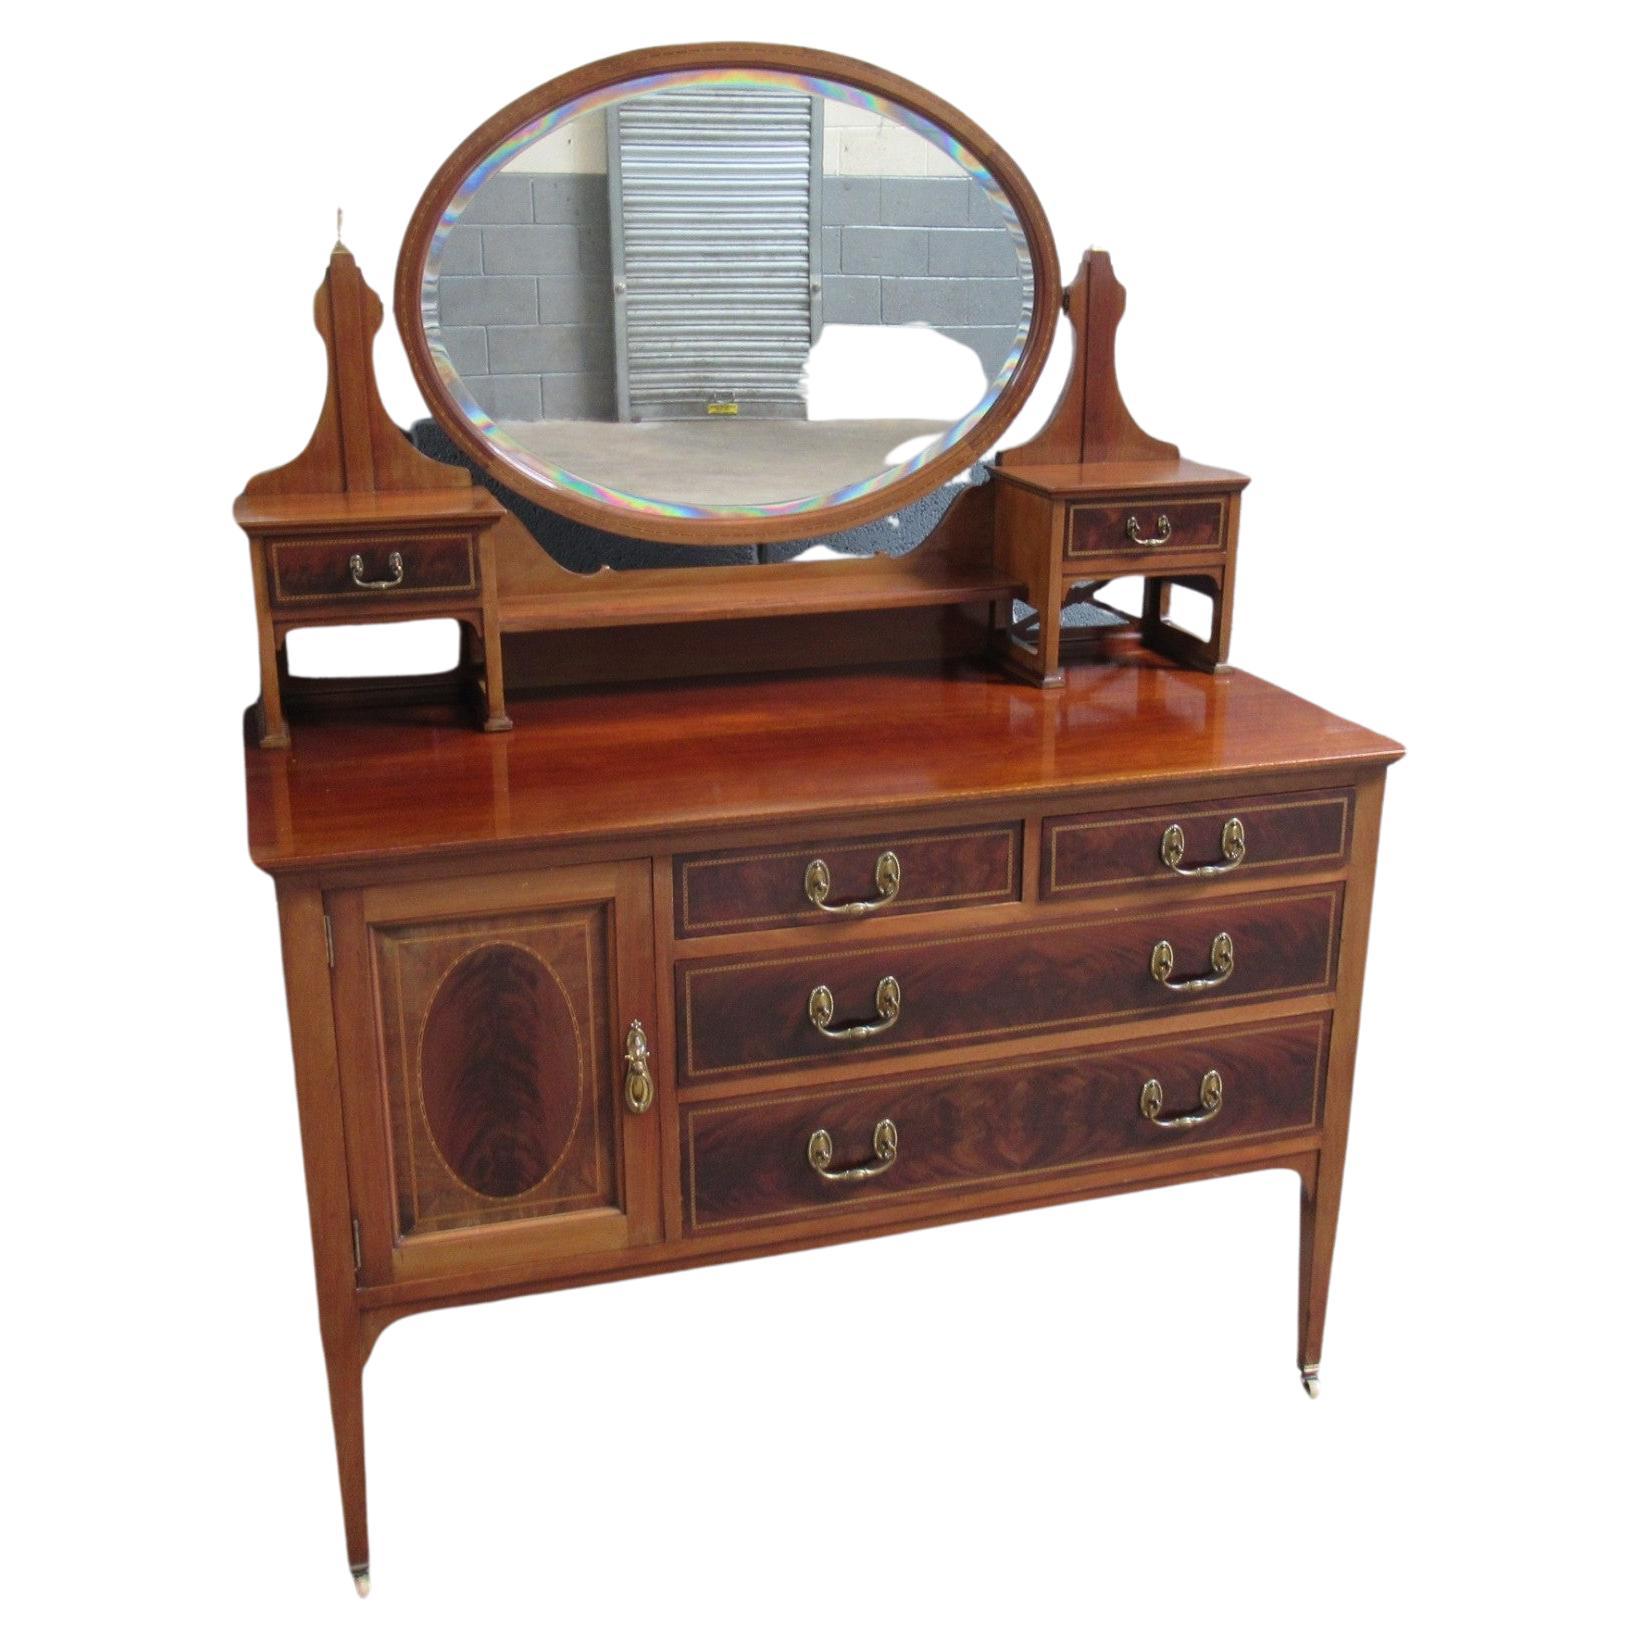 A Lovely Antique English Edwardian Inlaid Flame or Crotch Mahogany Ladies Dressing Table or Vanity with attached (and removable) original oval framed mirror.  This piece is made from superior materials including hand-dovetailed mahogany drawer